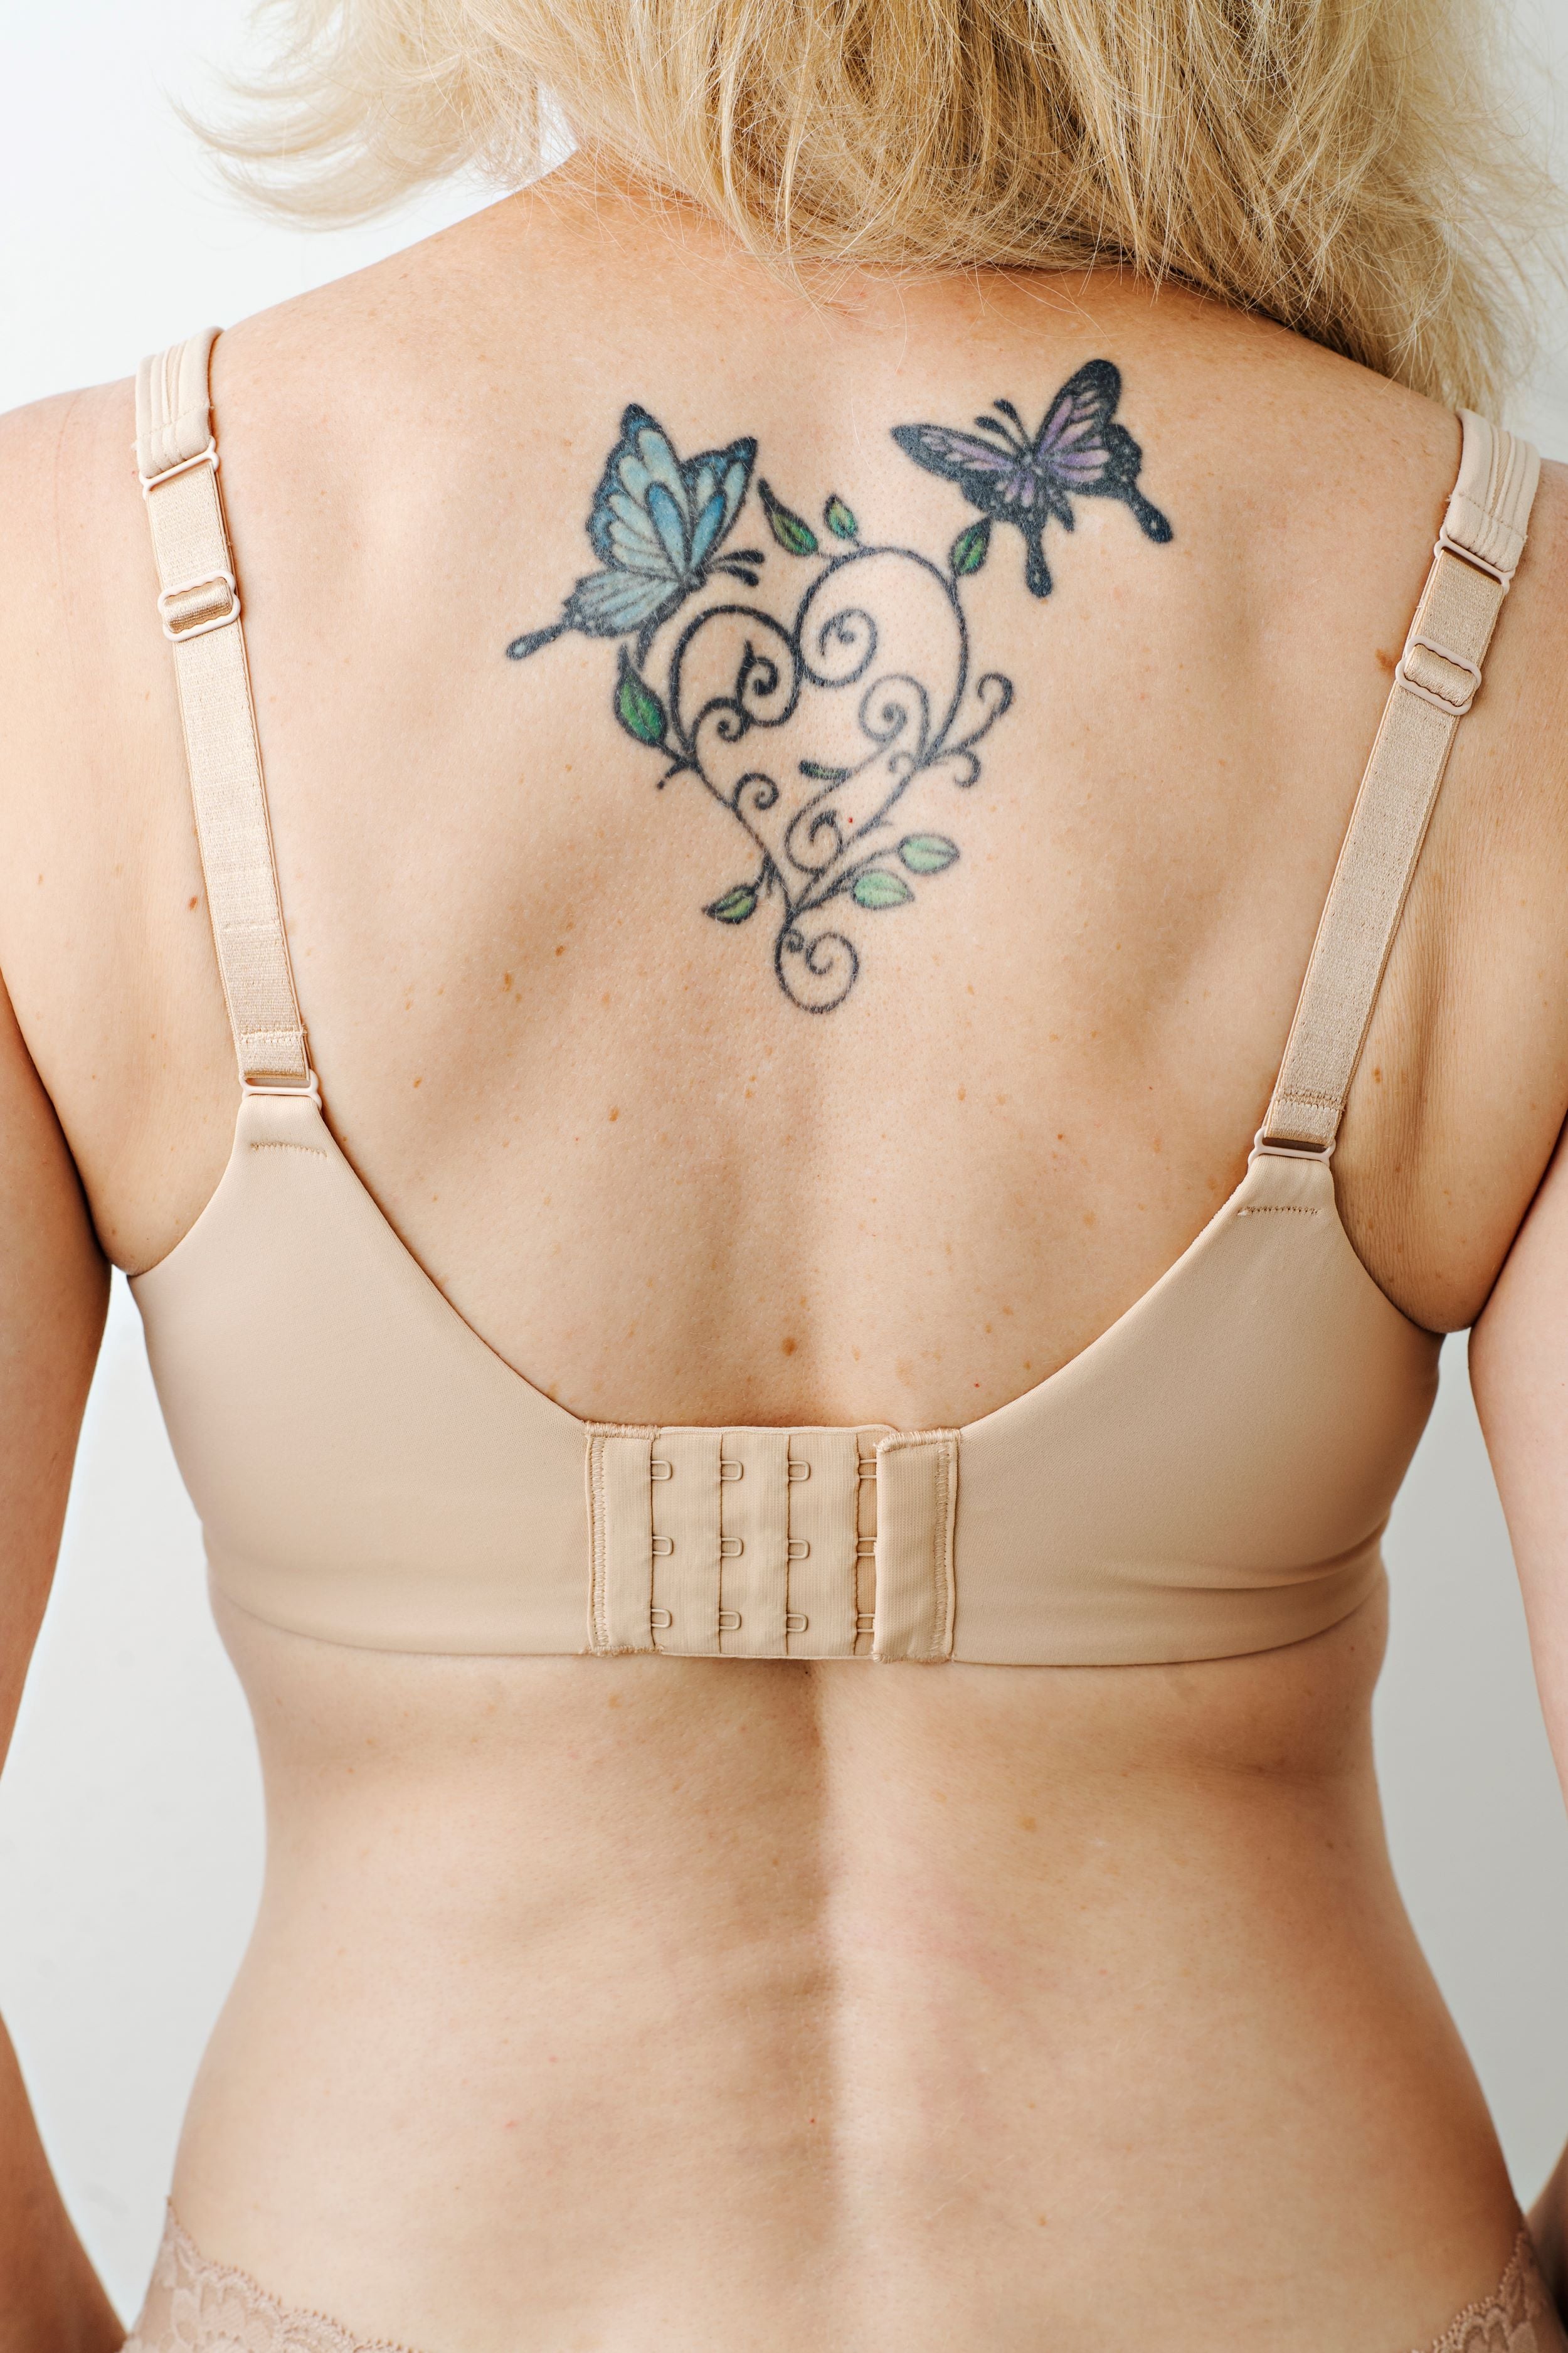 Abbie Luxe Back & Side Smoothing T-Shirt Bra in Navy Peony